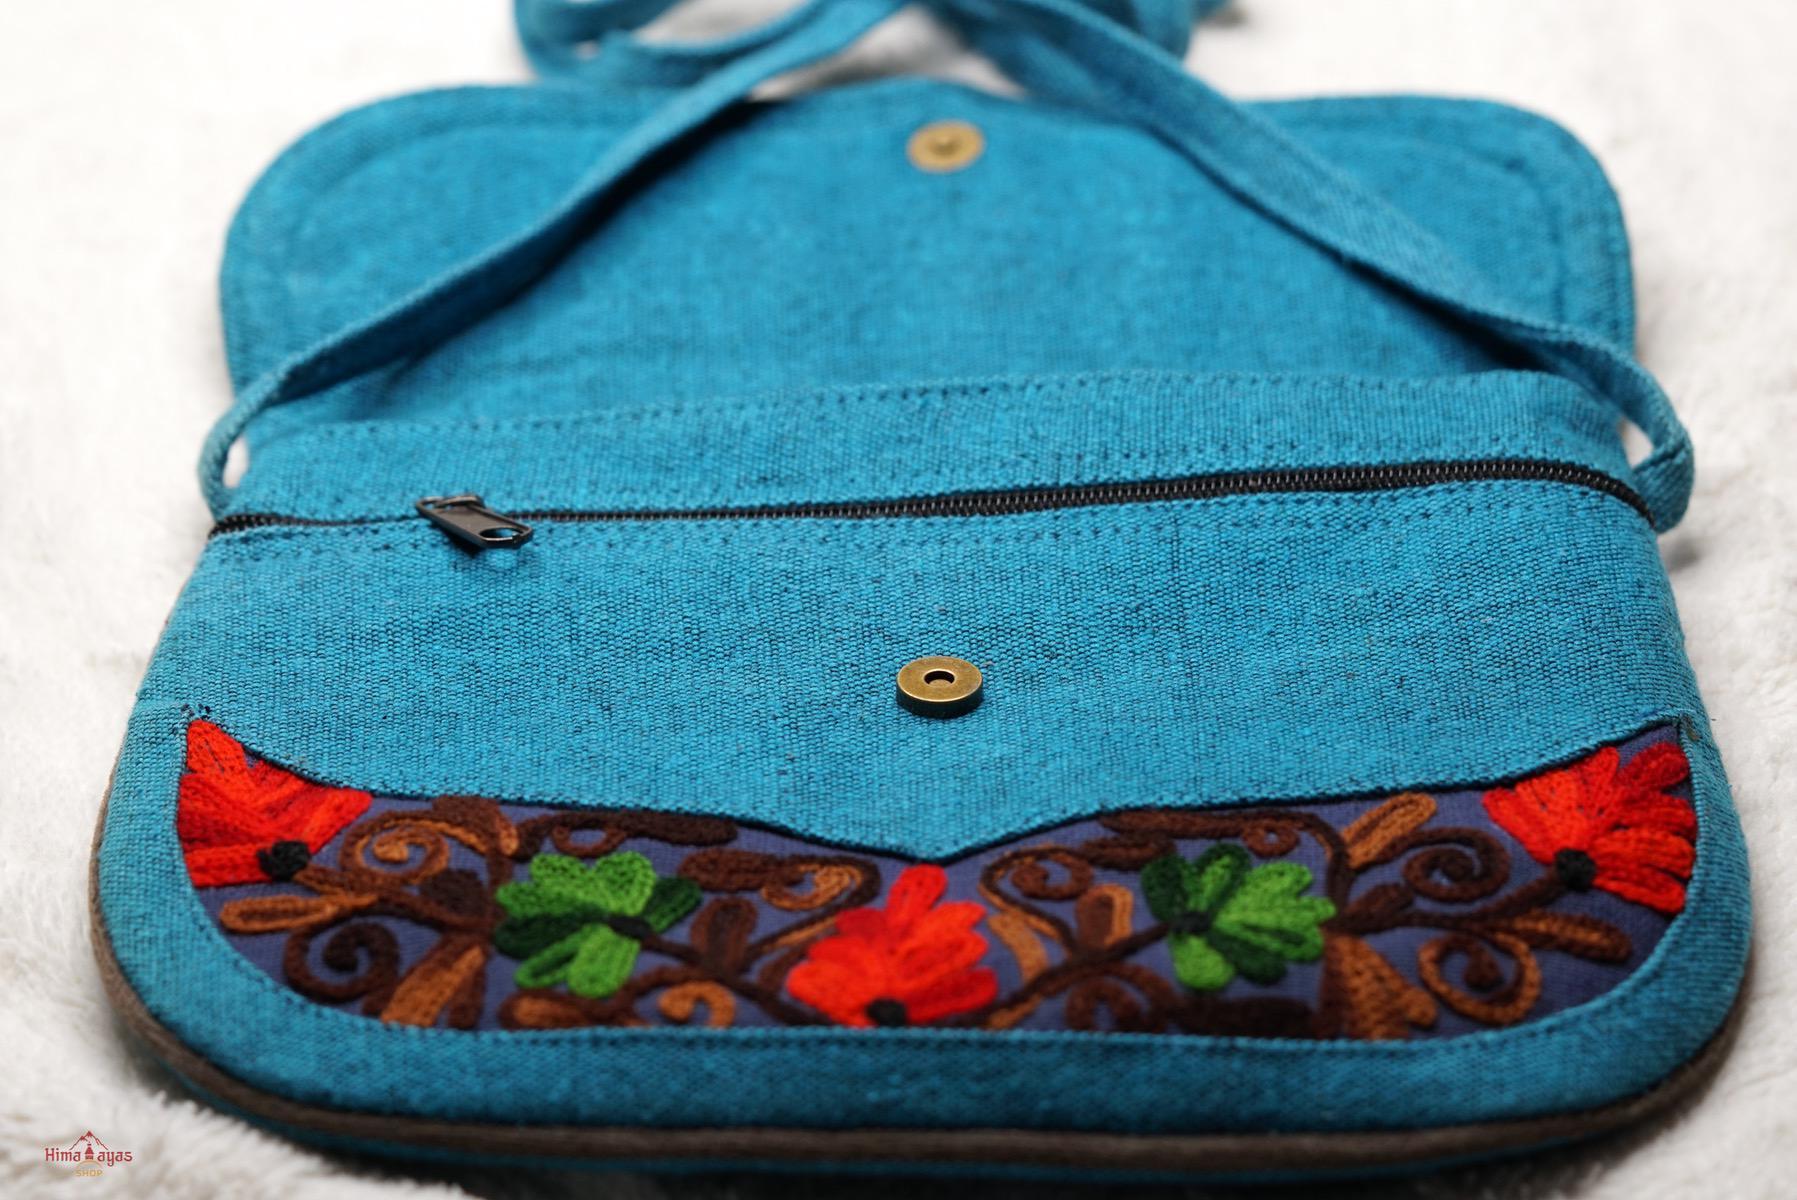 The sustainable environment friendly bags for every day uses, crafted with exquisite floral hand embroidery.